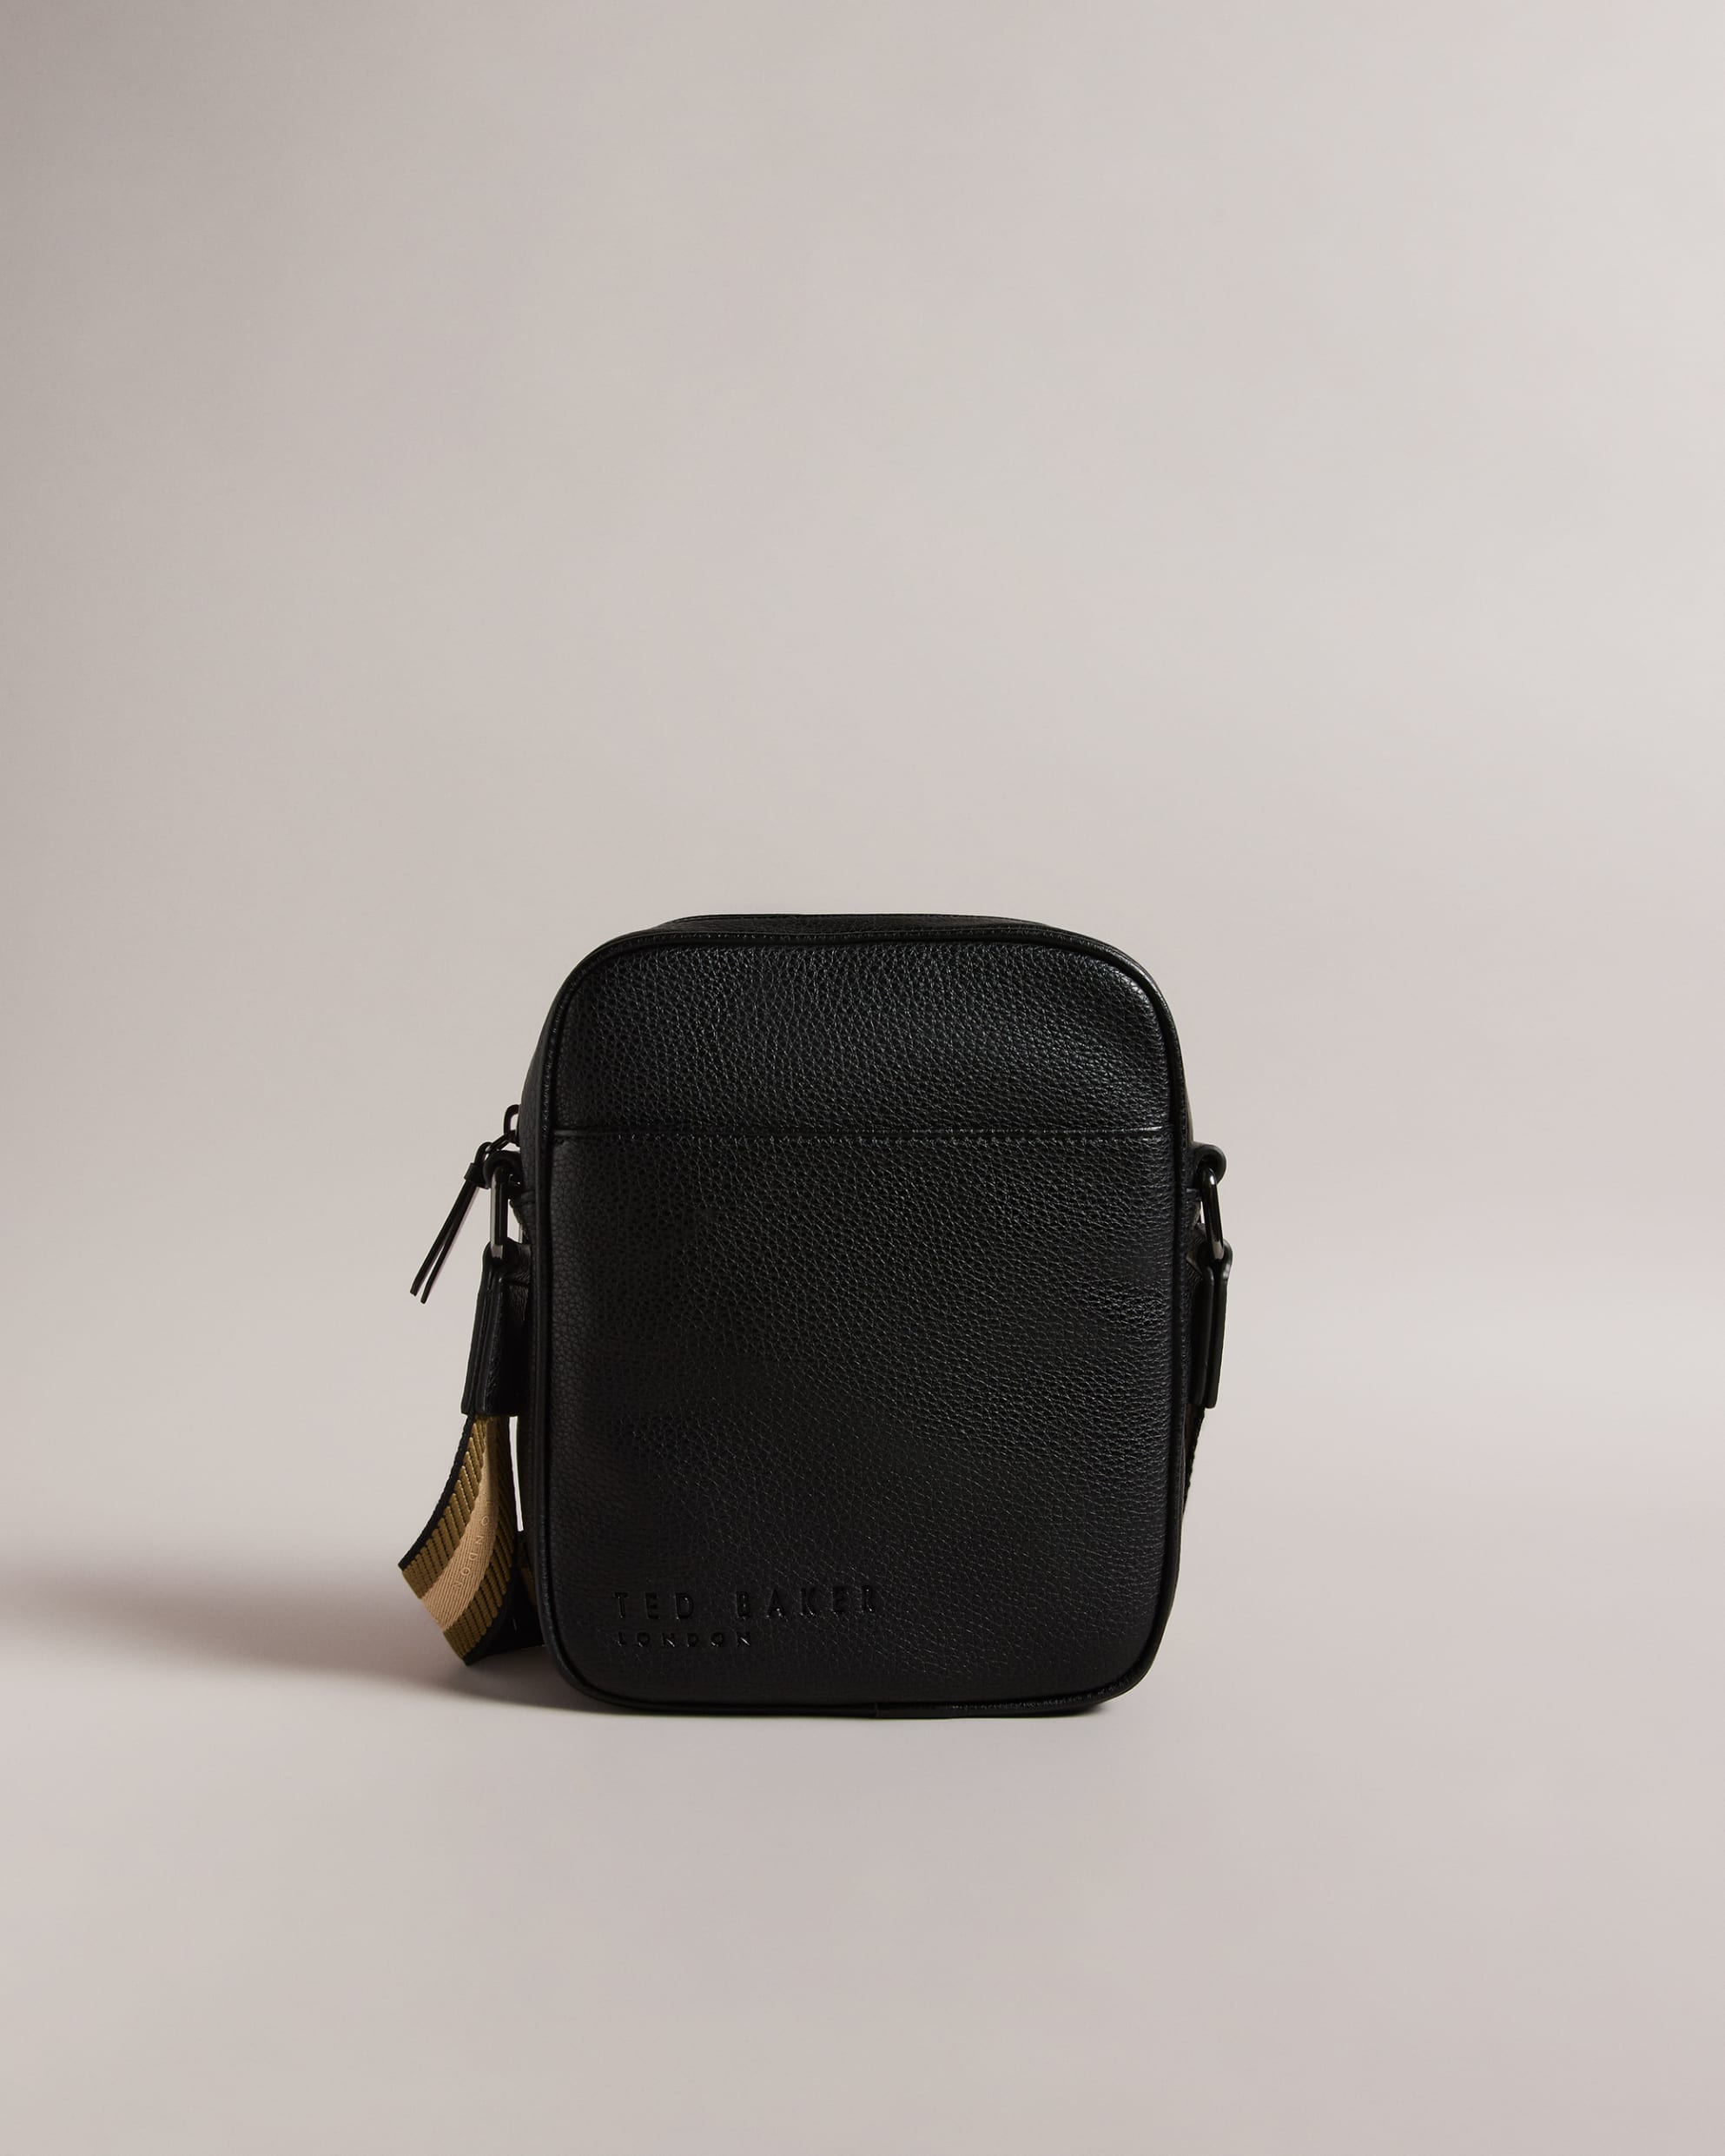  Ted Baker Kiian Faux Leather Webbing Crossbody Bag in Black 270328  | Shop from eightywingold an official brand partner for Ted Baker in Canada and US.